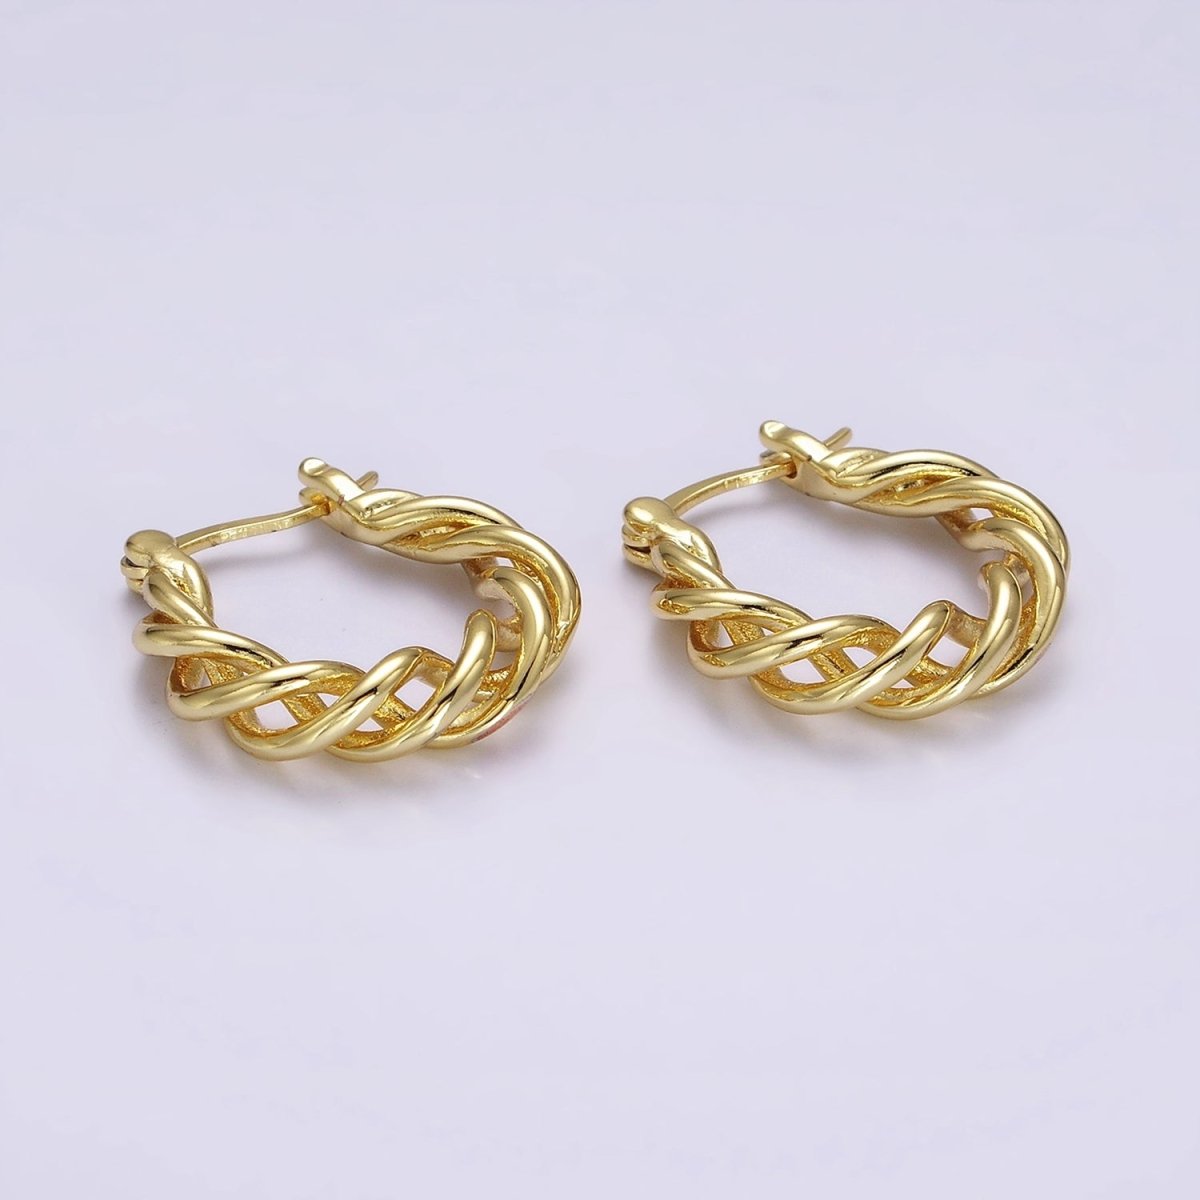 16K Gold Filled 20mm Twisted Earring Statement Rope French Lock Latch Hoop Earrings | AE632 - DLUXCA